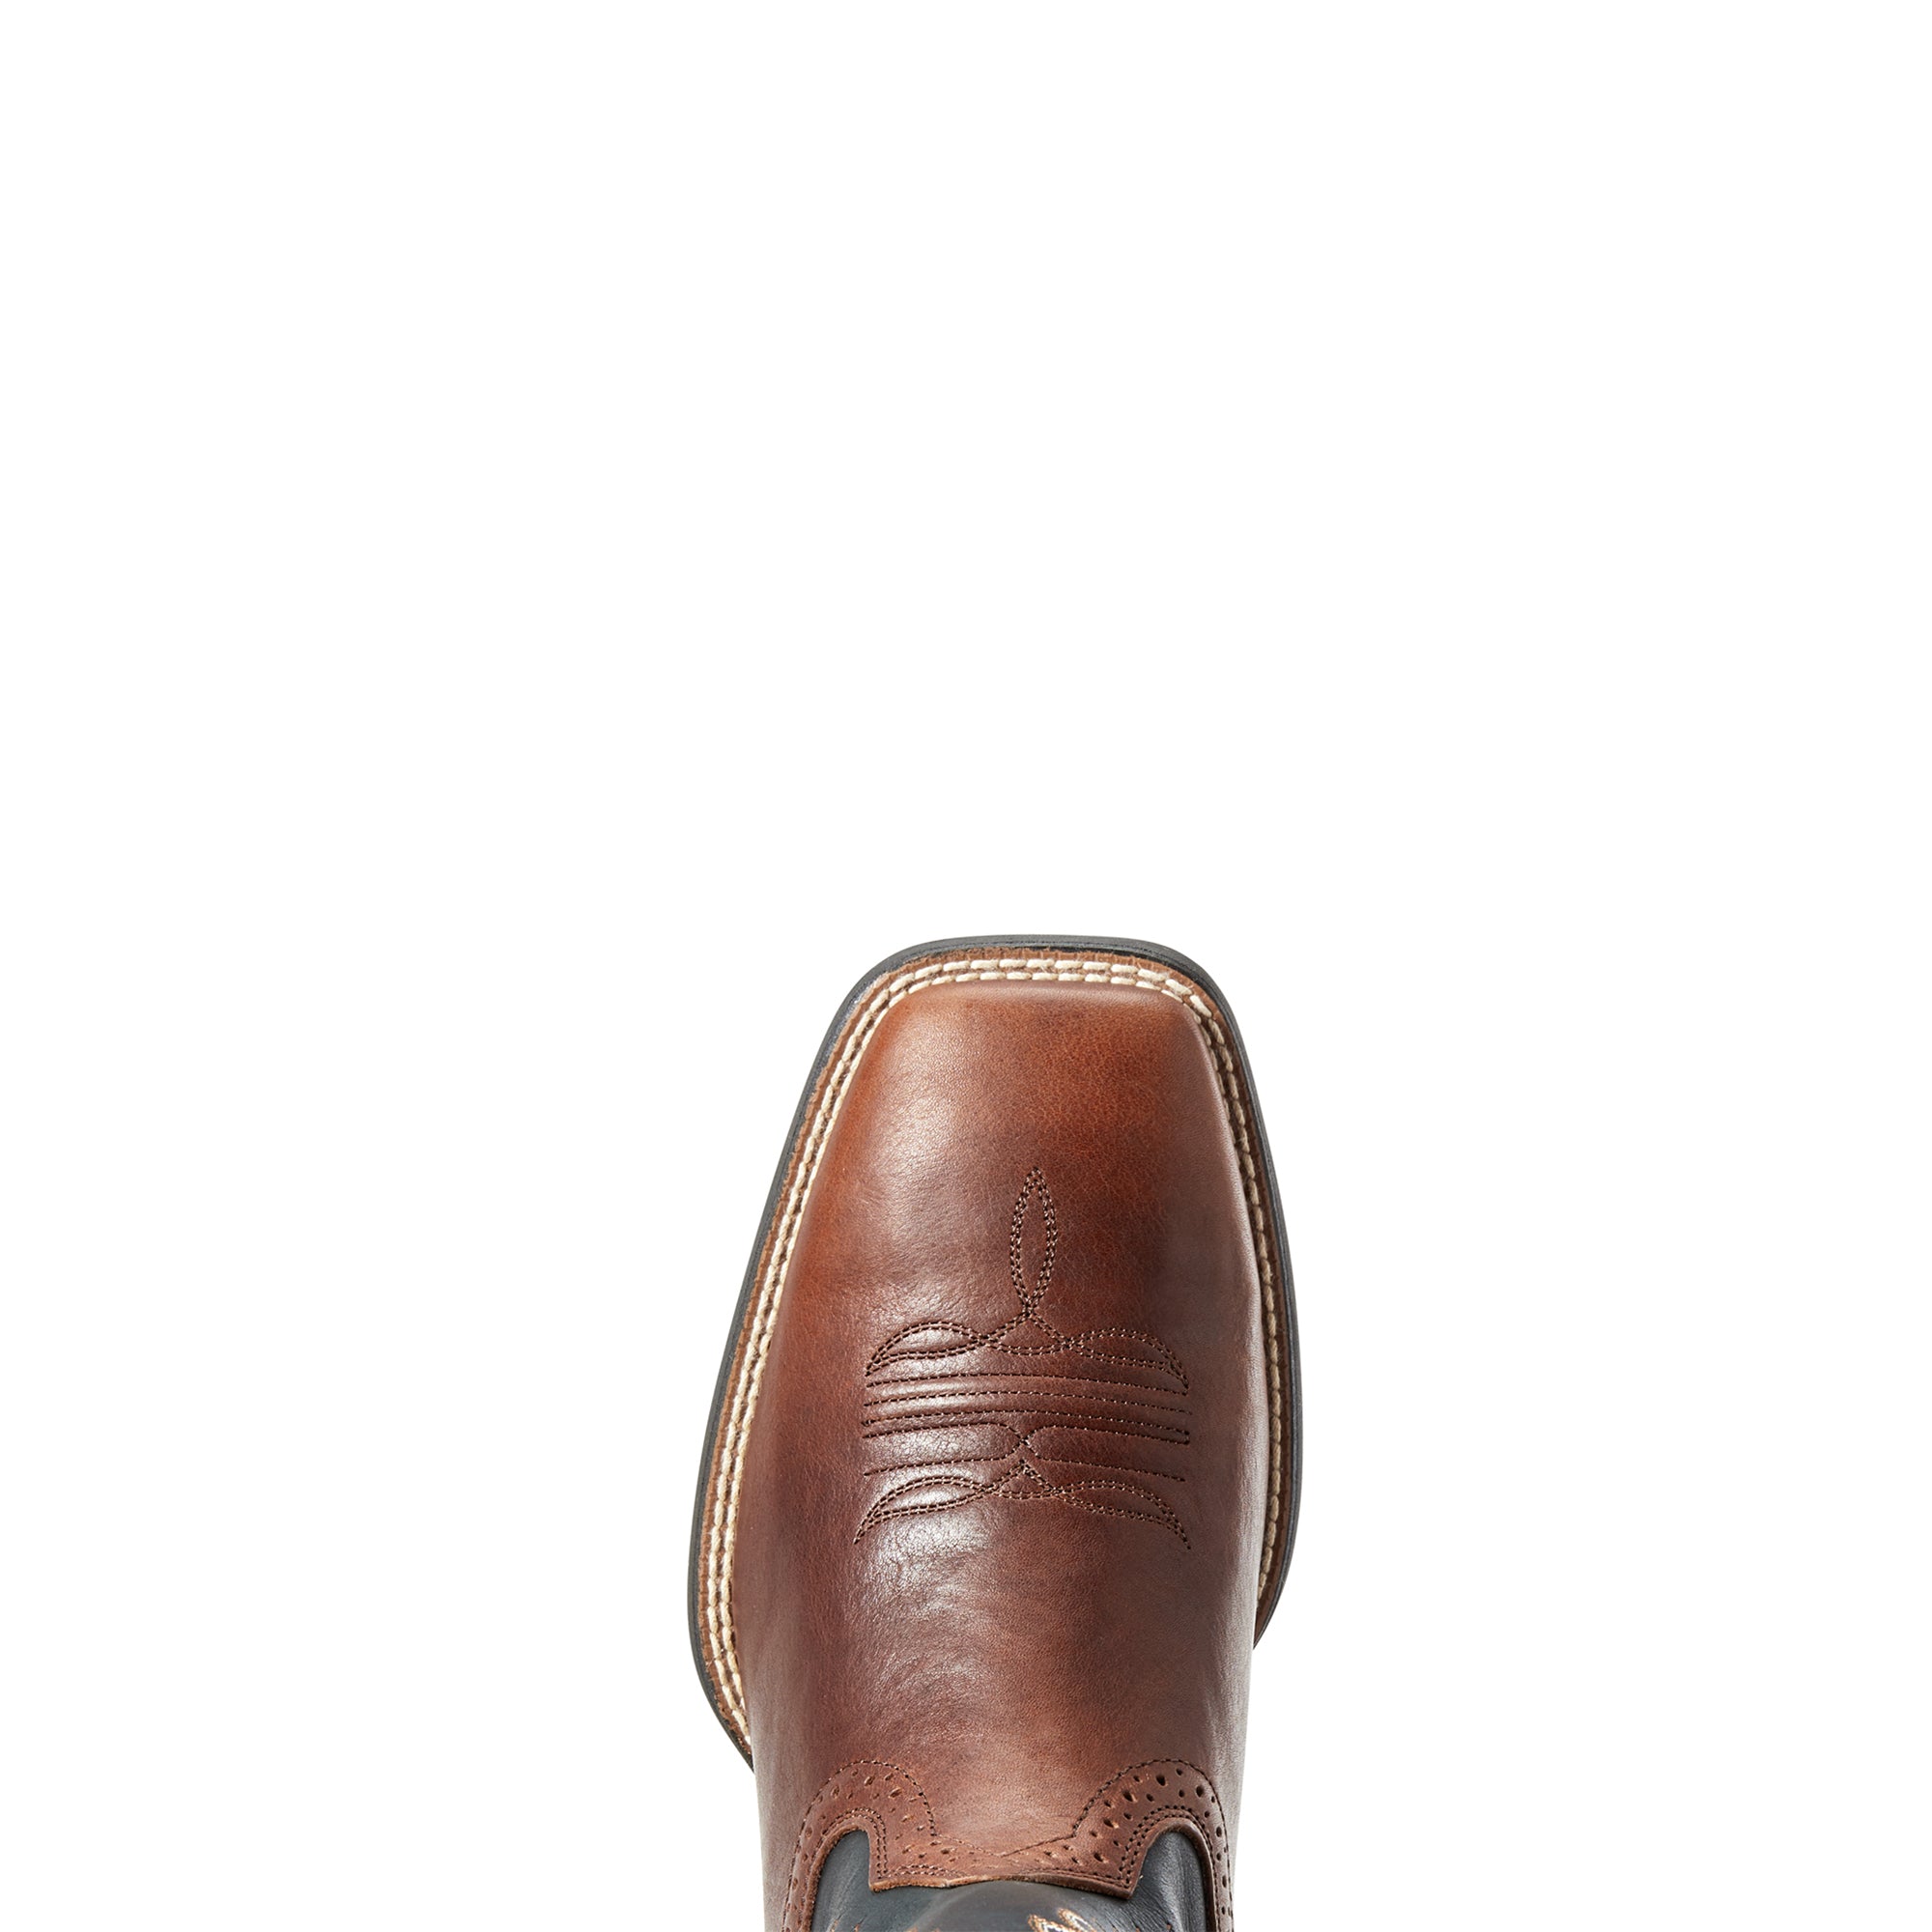 Sport Wide Square Toe Western Boots